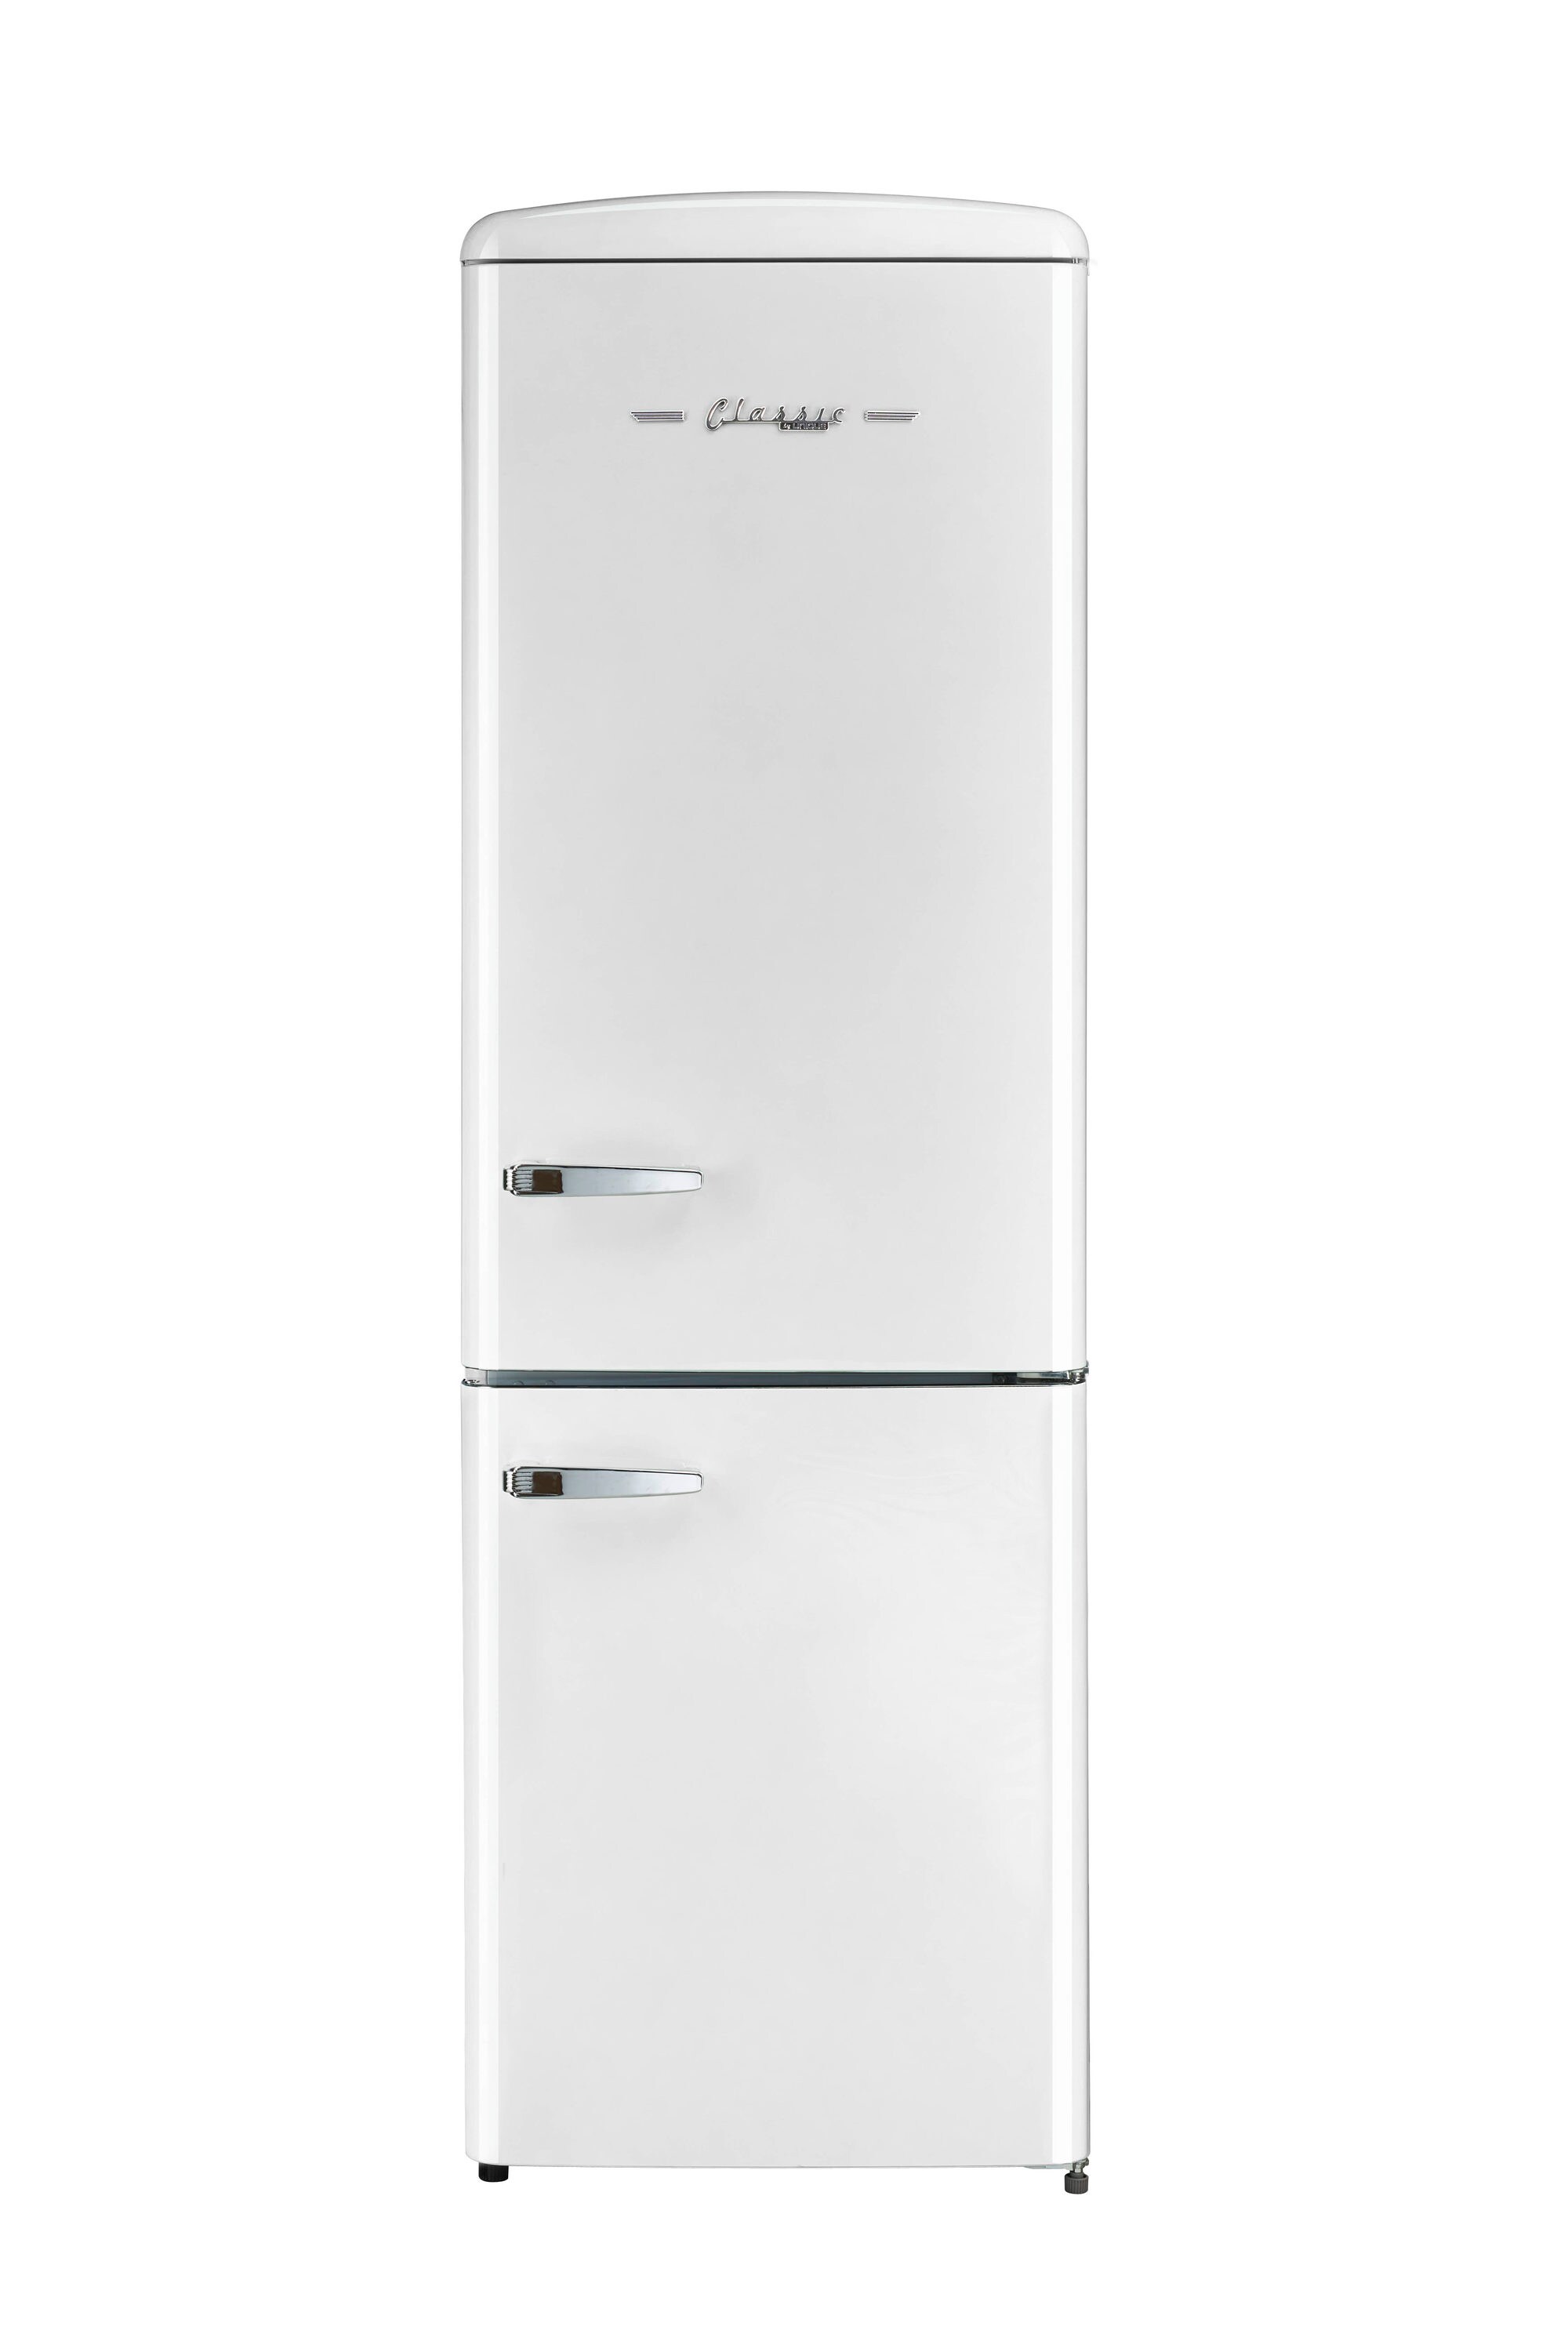 Classic by Unique 11.7-cu ft Bottom-Freezer Refrigerator (Marshmallow White) ENERGY STAR the Bottom-Freezer Refrigerators department at